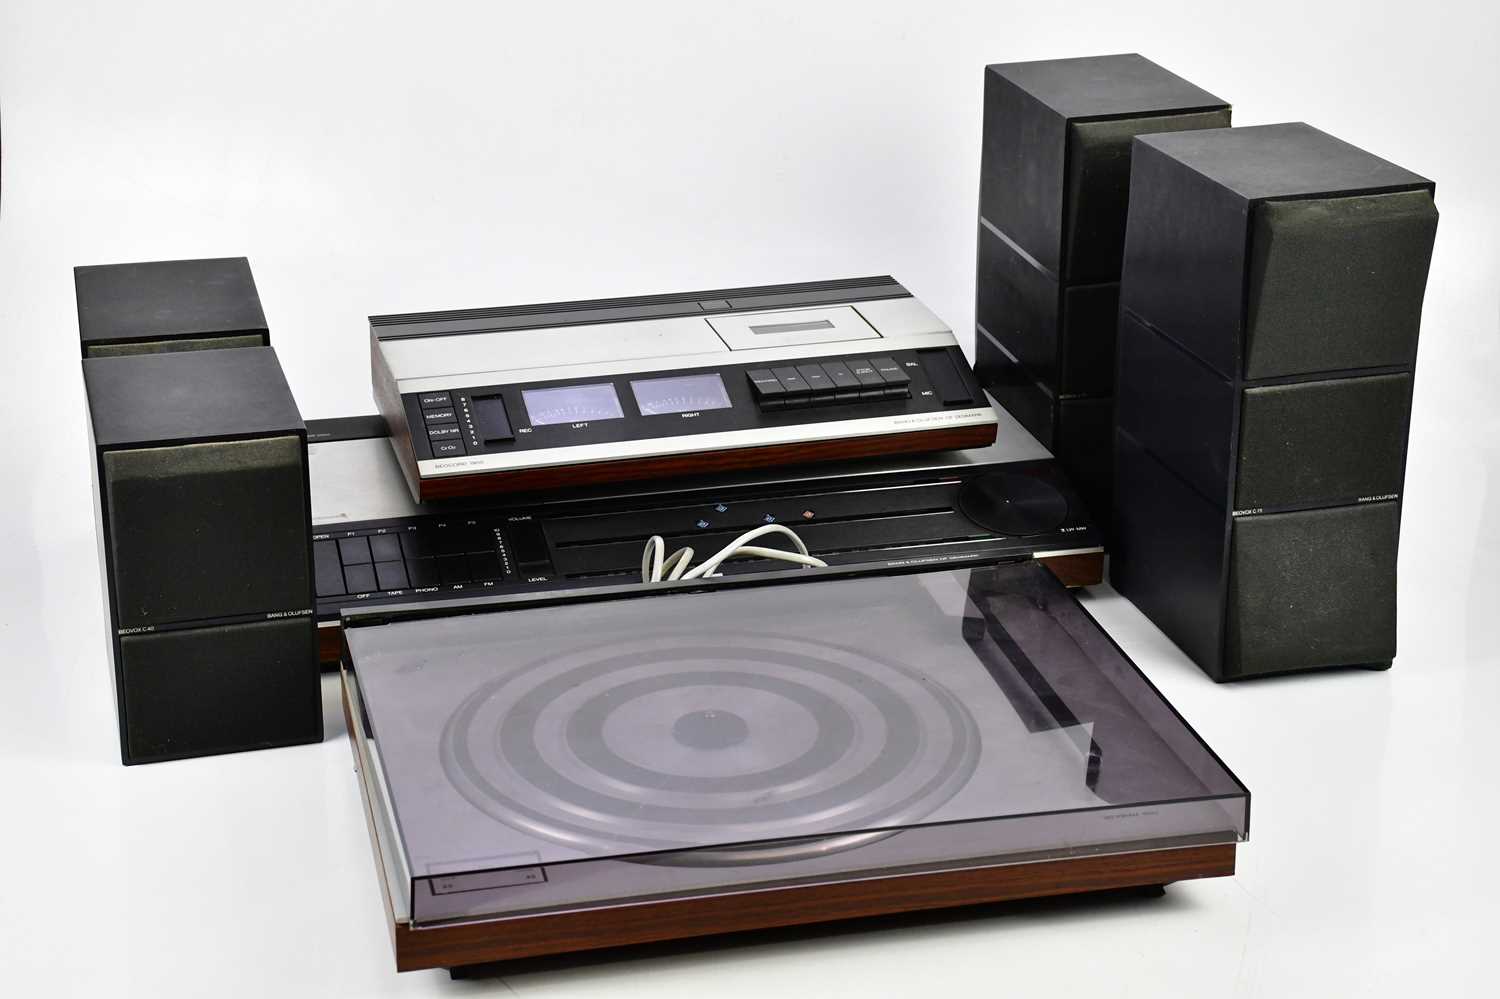 BANG & OLUFSEN; a Beomaster 2200, Beocord 1900 and Beogram 1500, a pair of Beovox C40 speakers and a